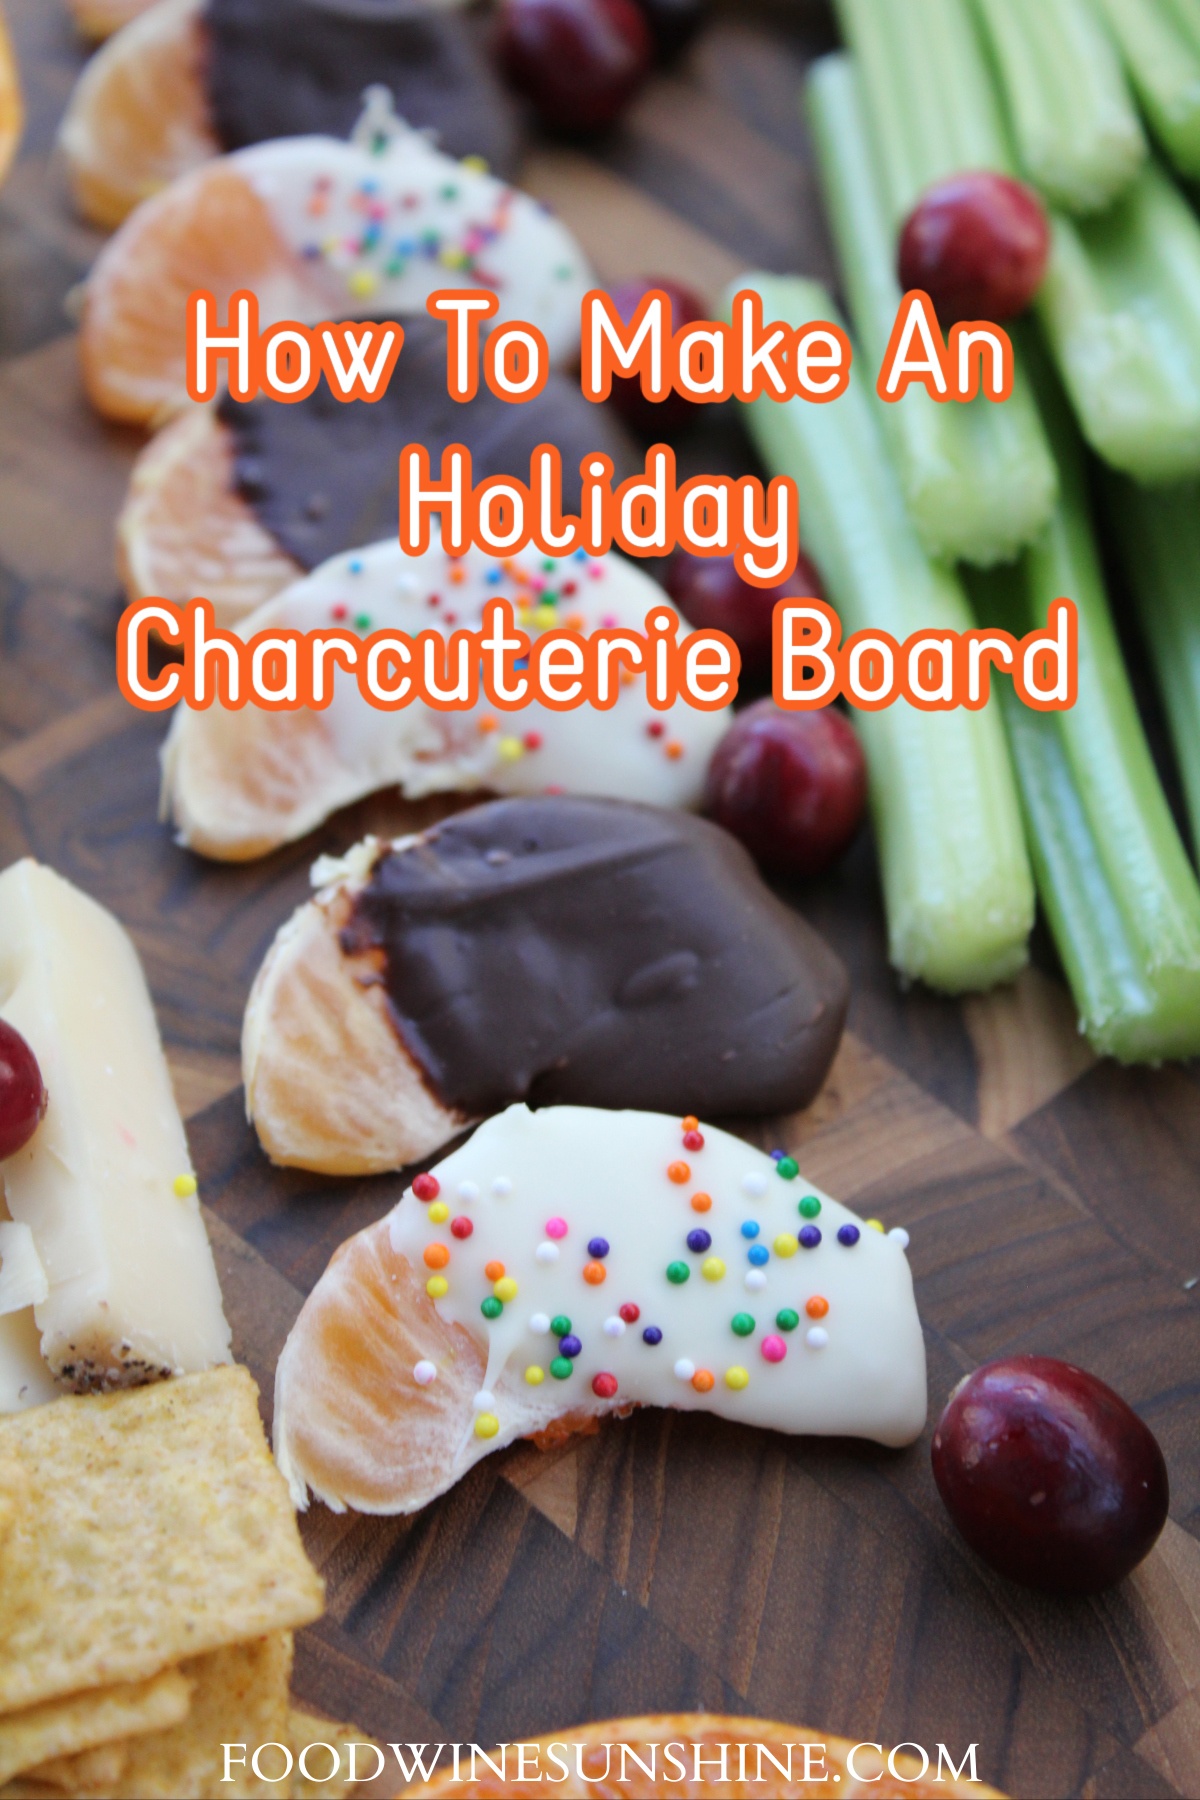 How To Make An Holiday Charcuterie Board